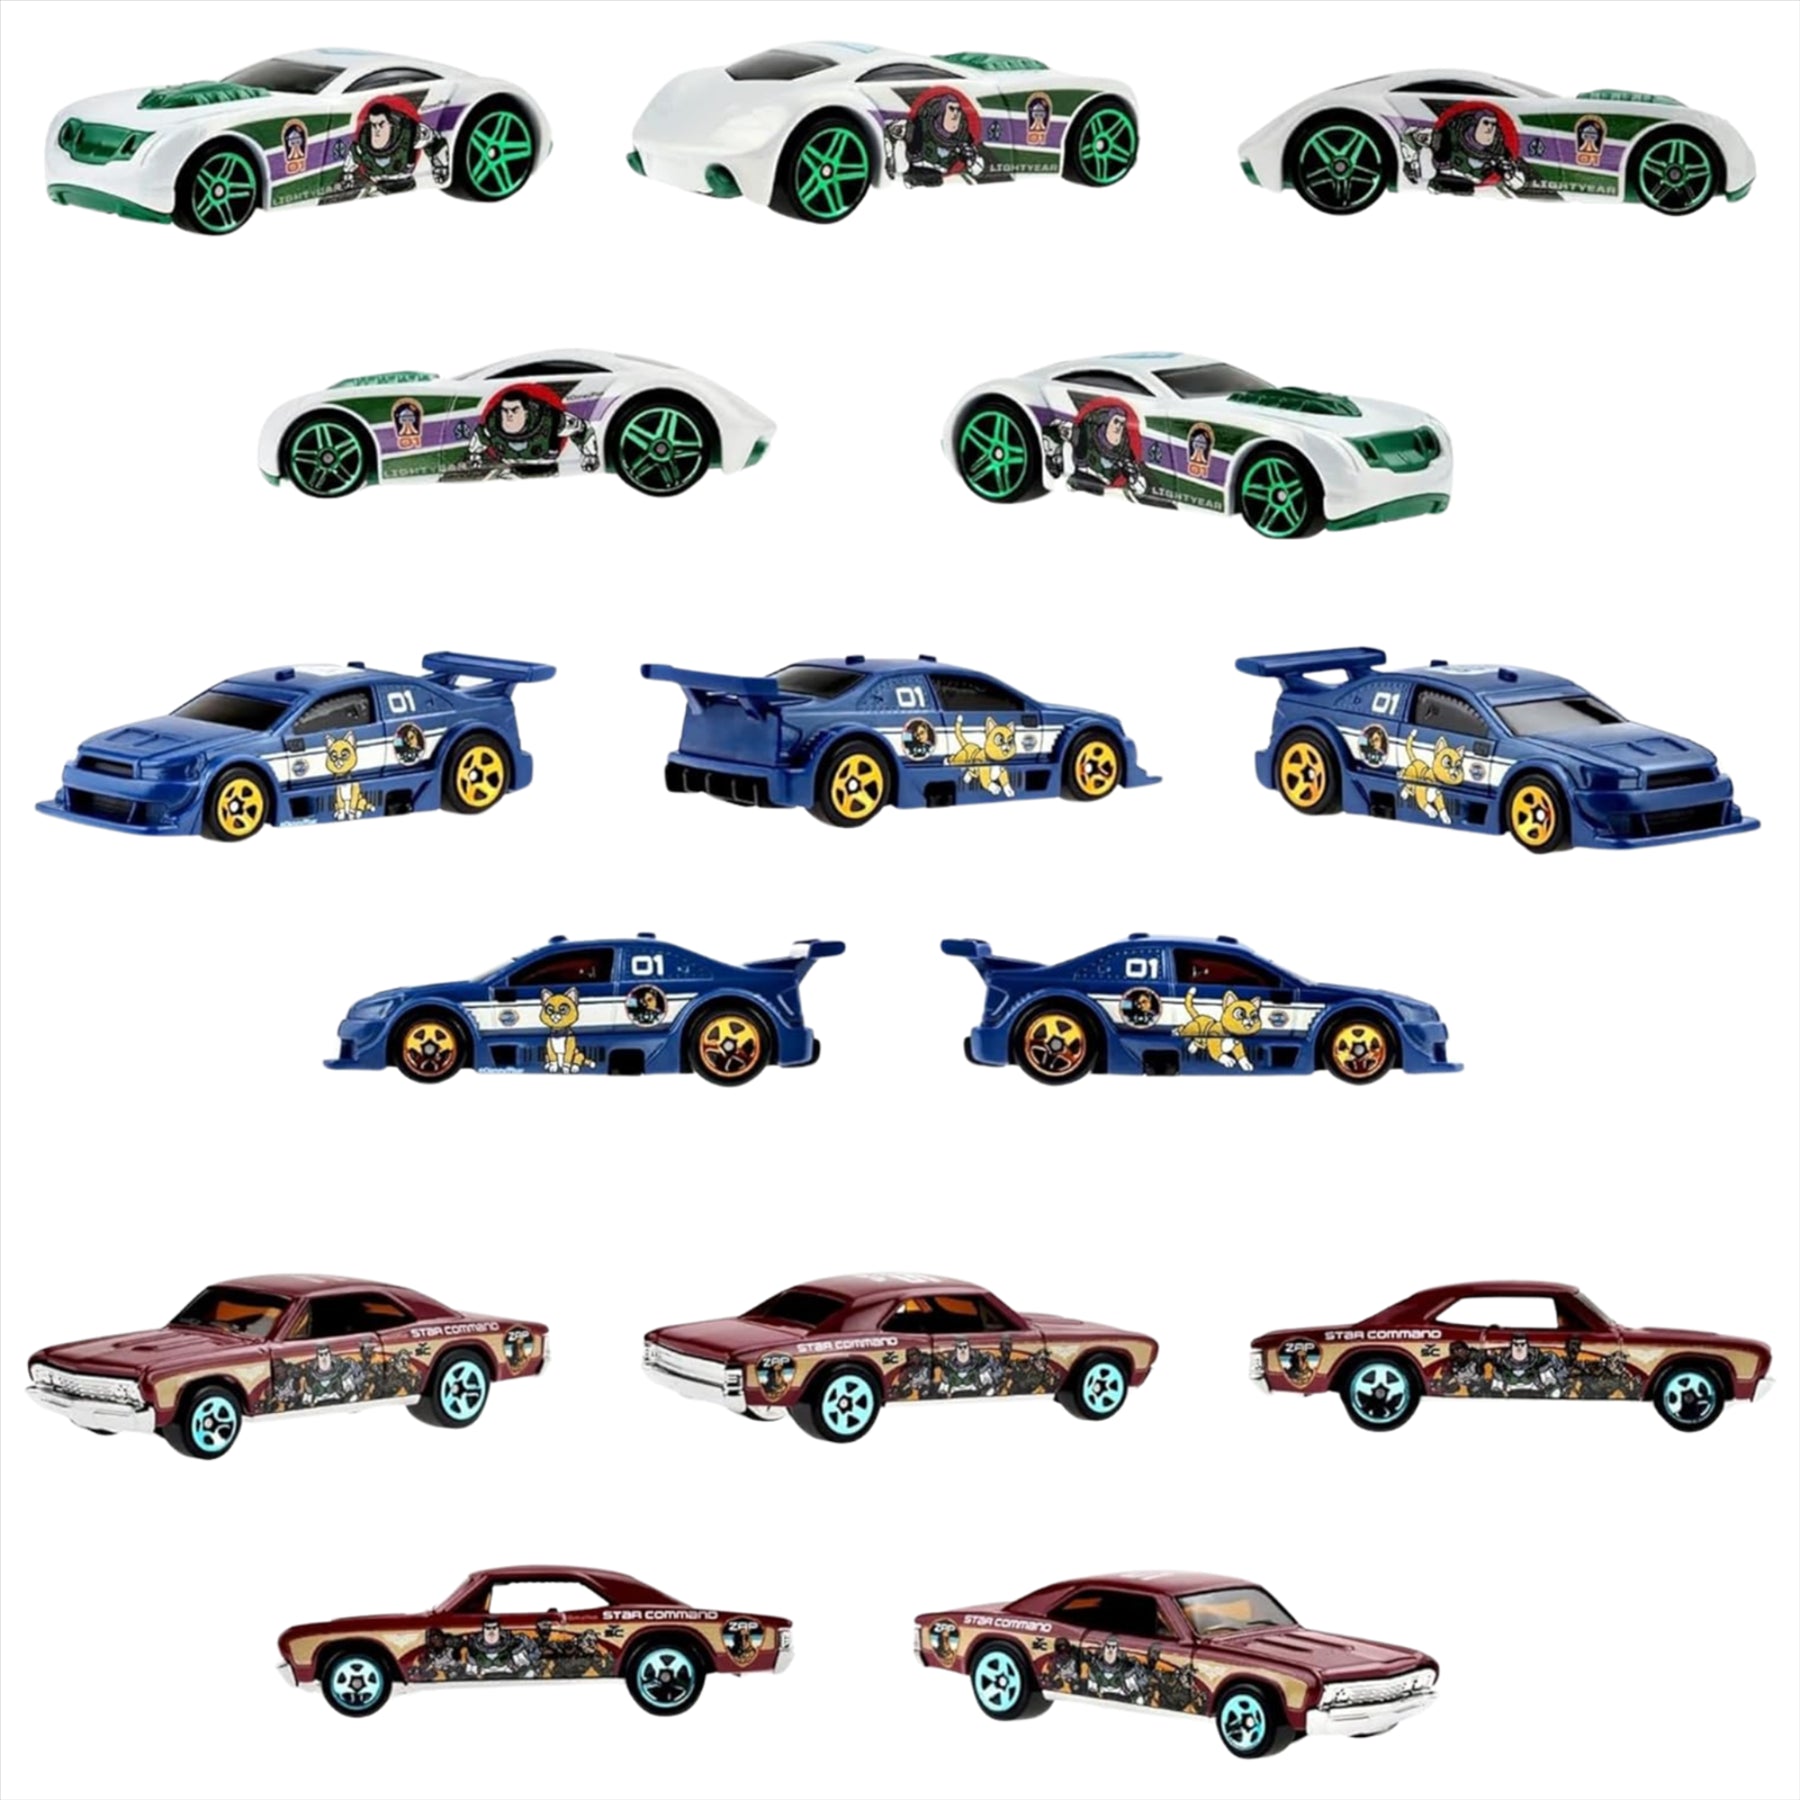 Hot Wheels Diecast Lightyear Character Cars - Sir Ominous, Hiway Hauler 2, 67 Chevelle SS 396, Fast Felion & Amazoom - All 5 - Toptoys2u